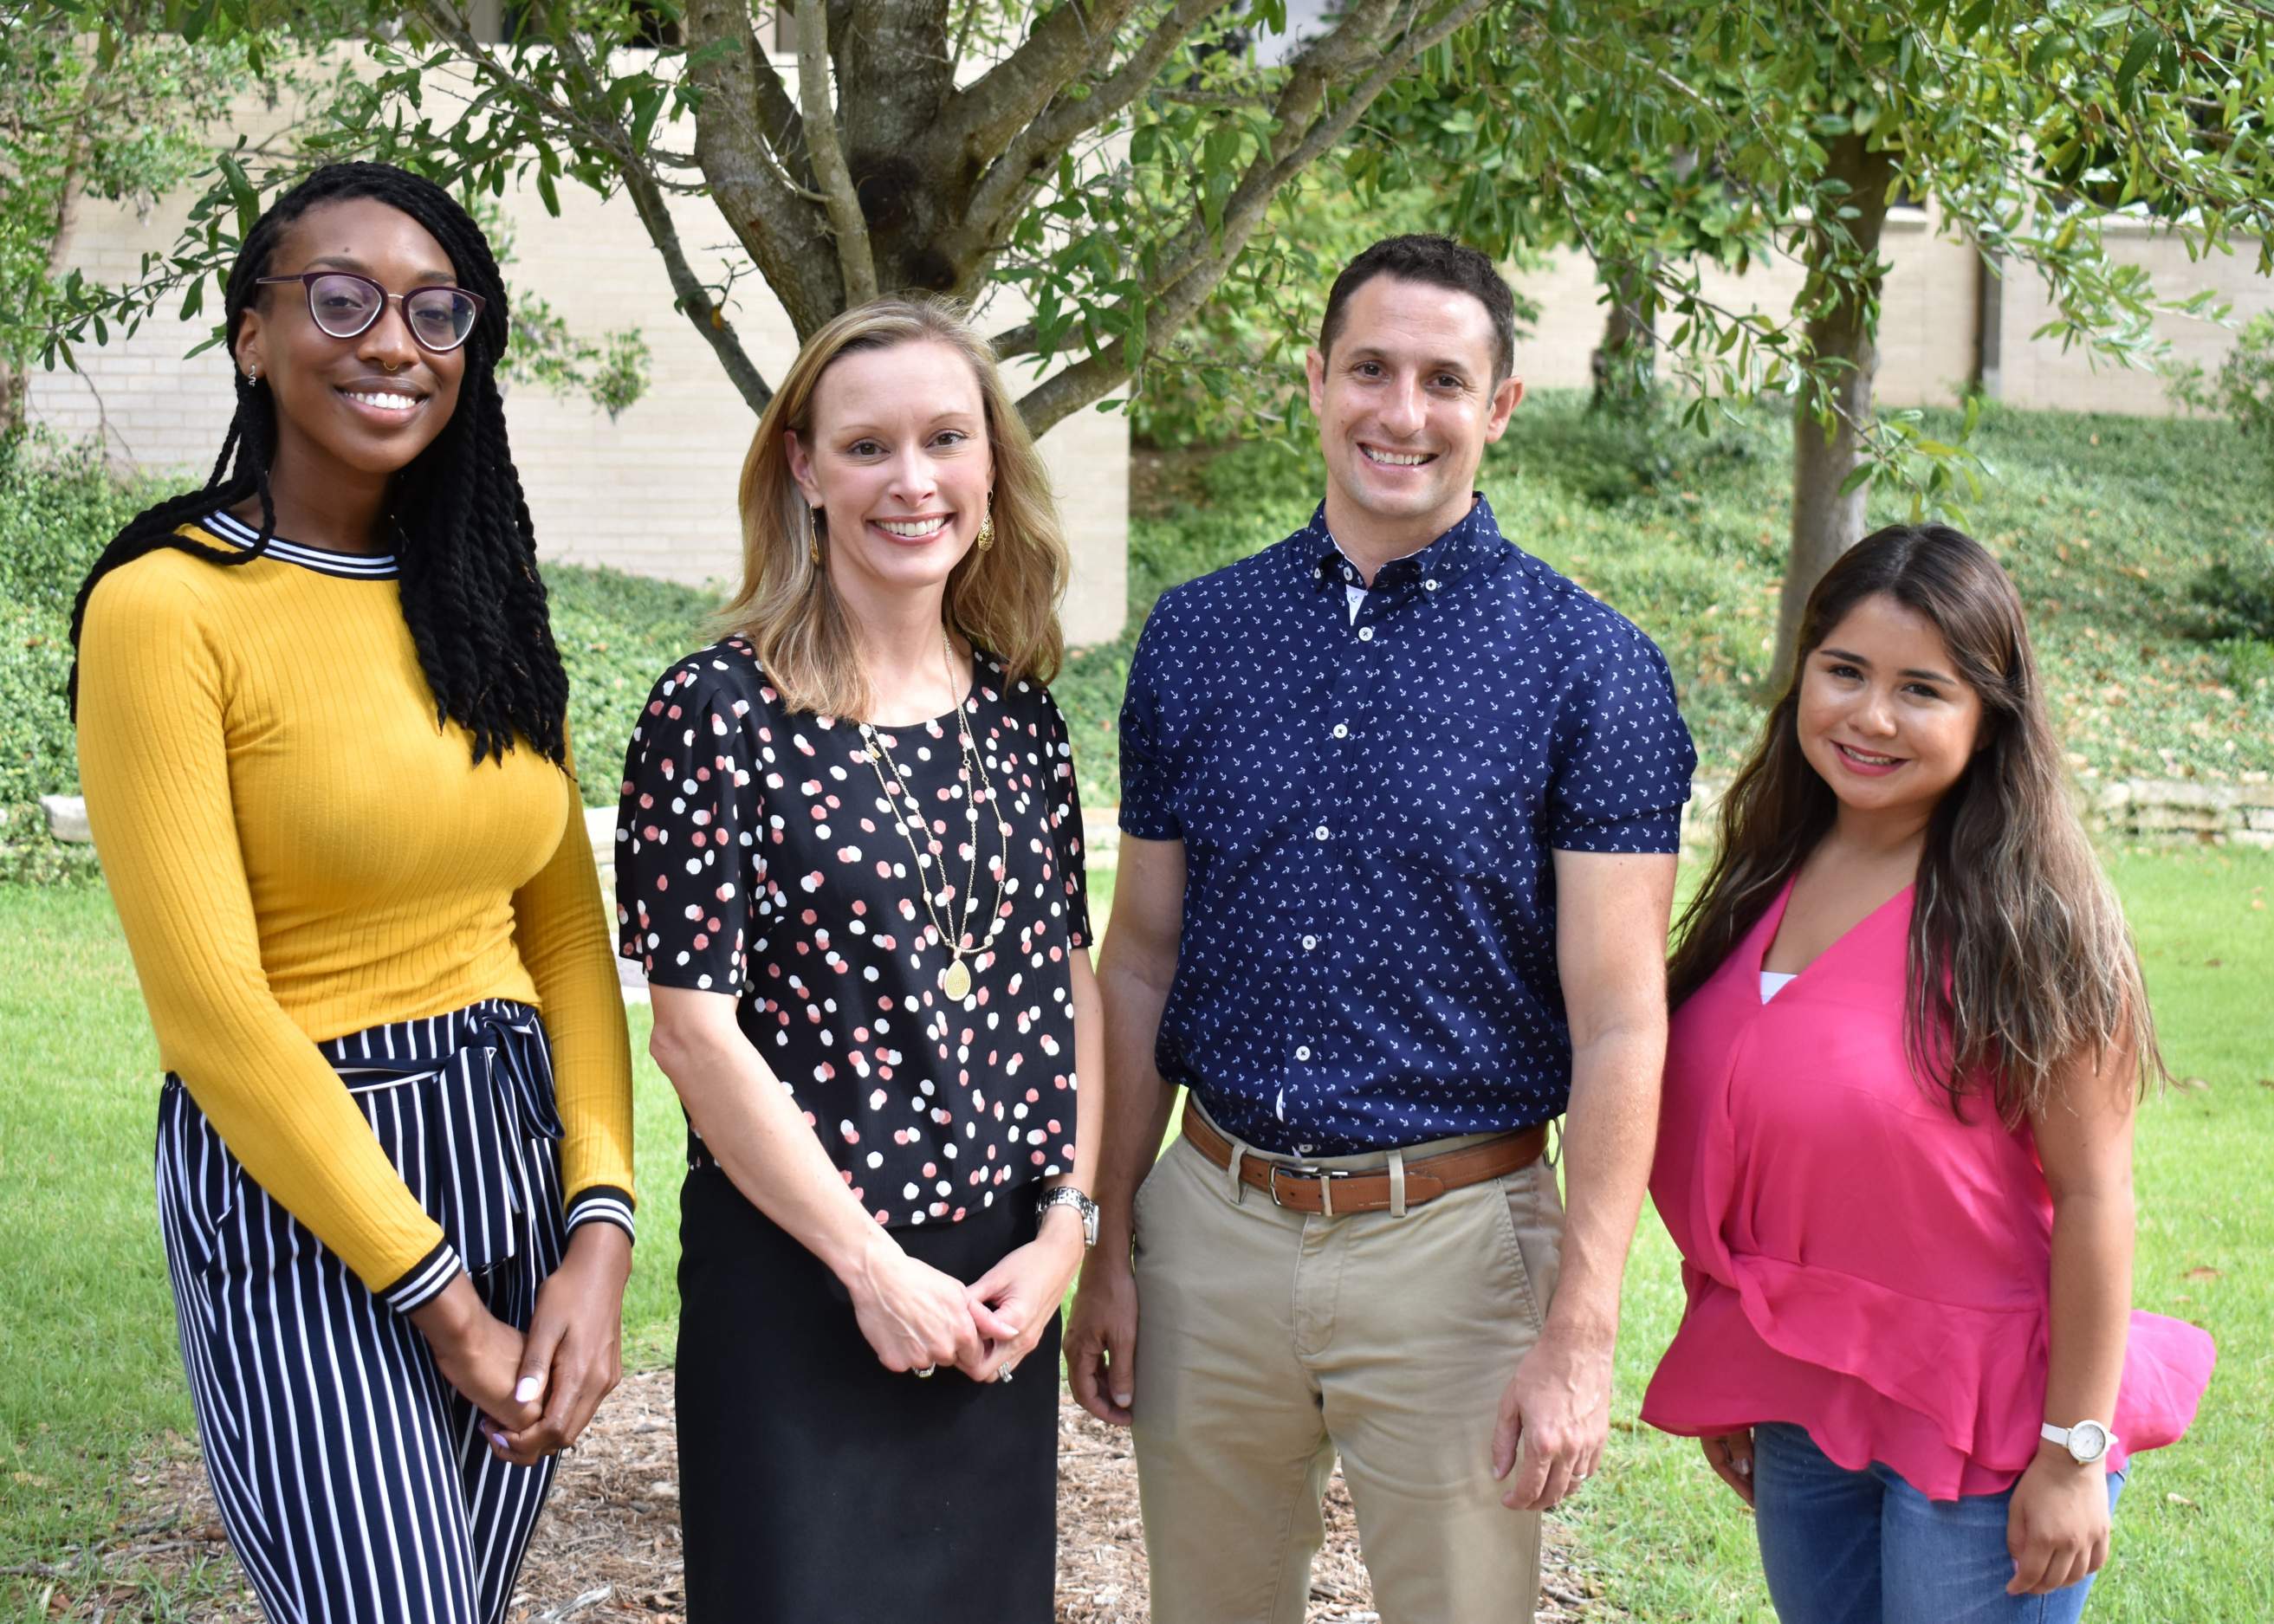 Dr. Collins (center left) and Dr. Ciullo (center right) will be assisted by their graduate student research team Shade' Smith (far left) and Marcela Rodriguez (far right)